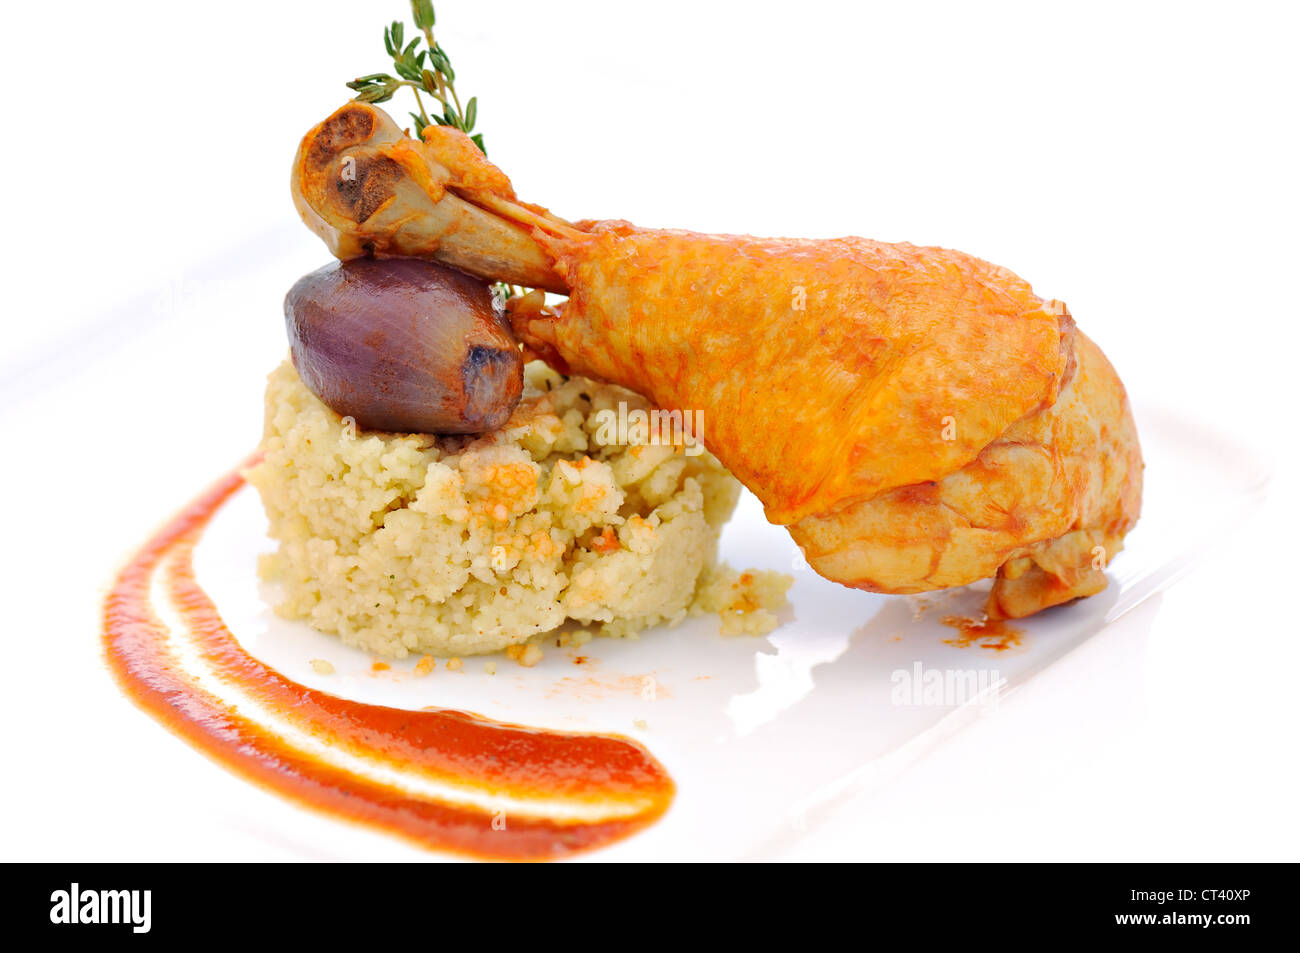 prepared drumstick with onion and cereals on white plate Stock Photo